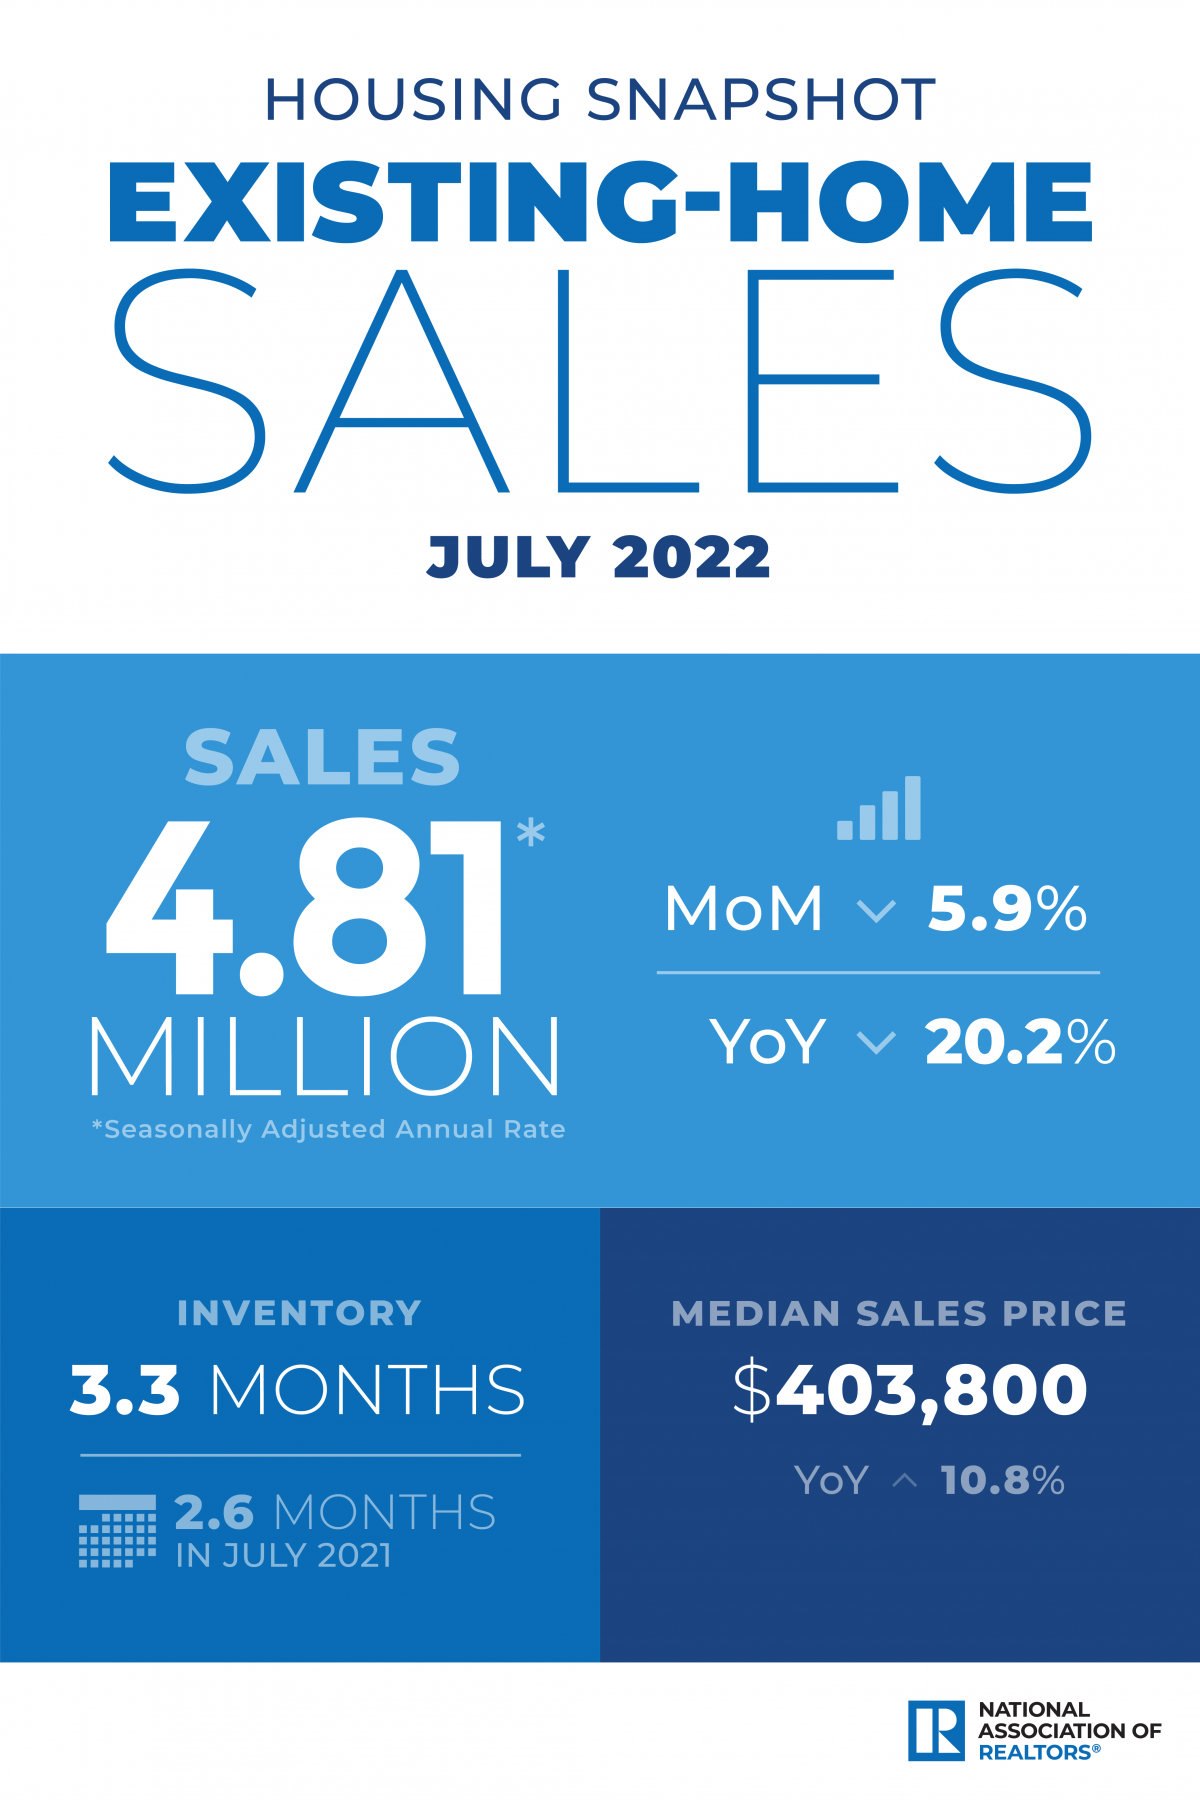 Existing-home sales down 5.9% month over month.